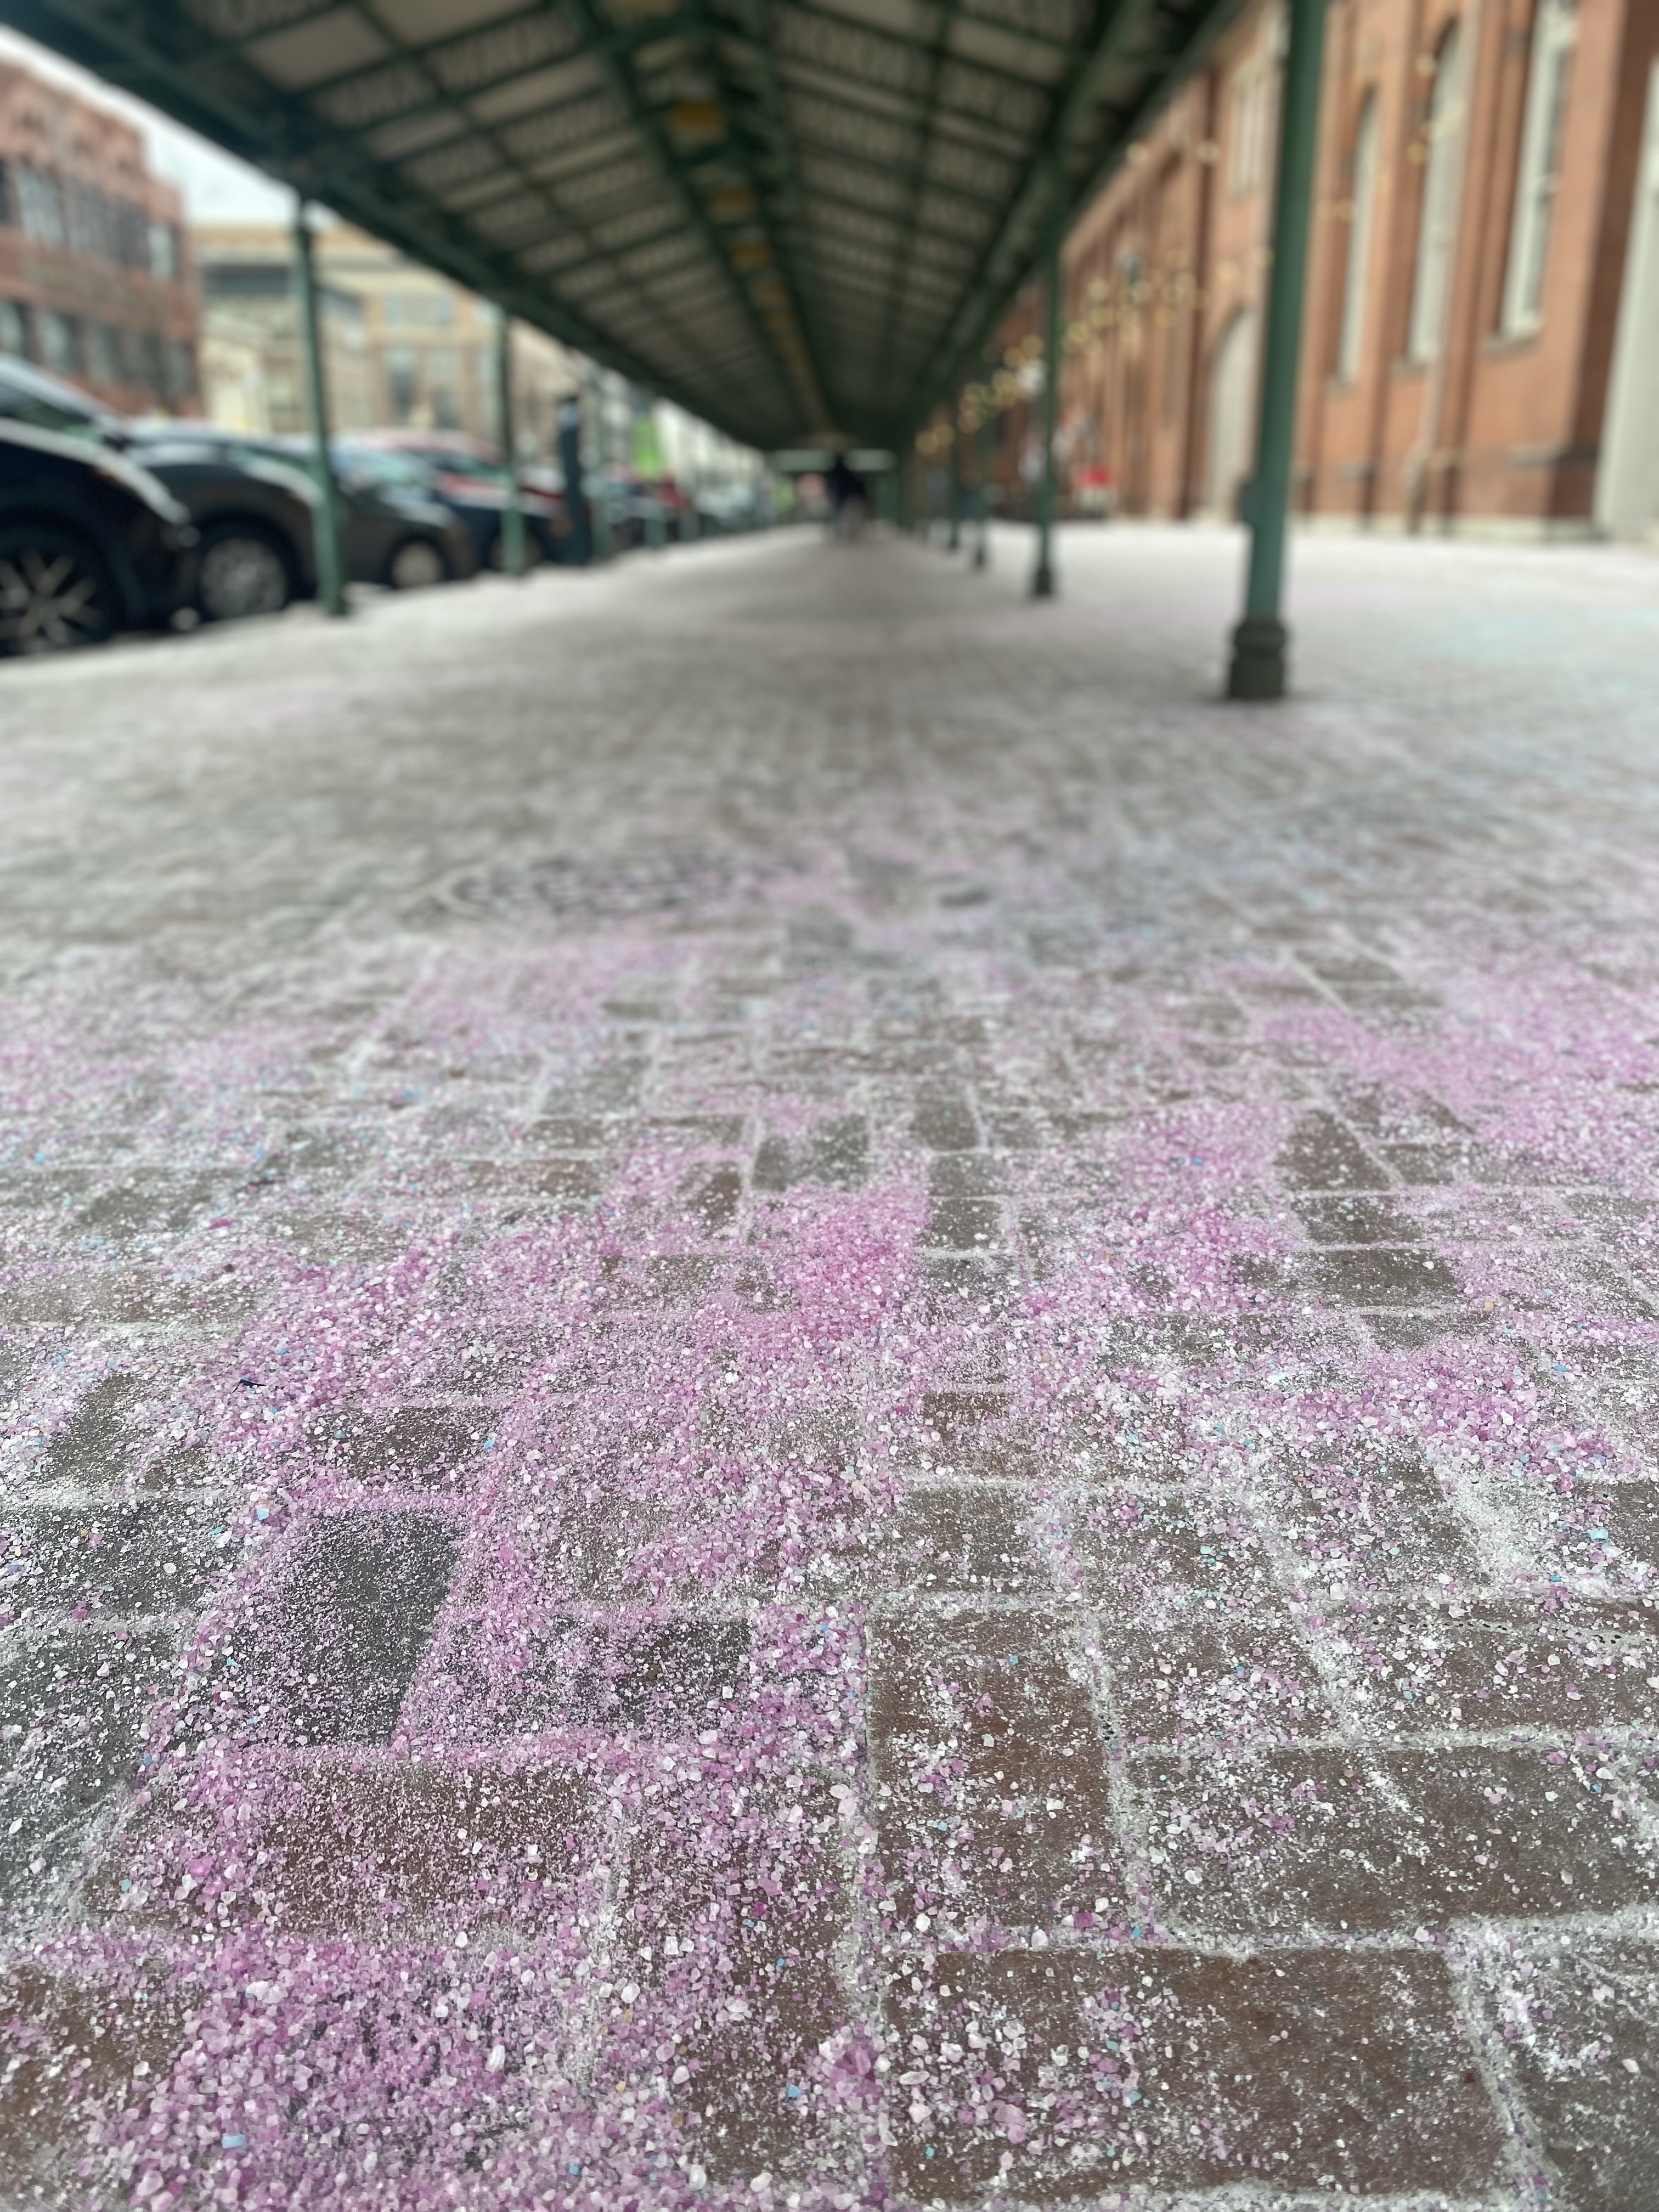 Pink salt is scattered over a brick sidewalk near a 19th century red brick building in Washington, DC